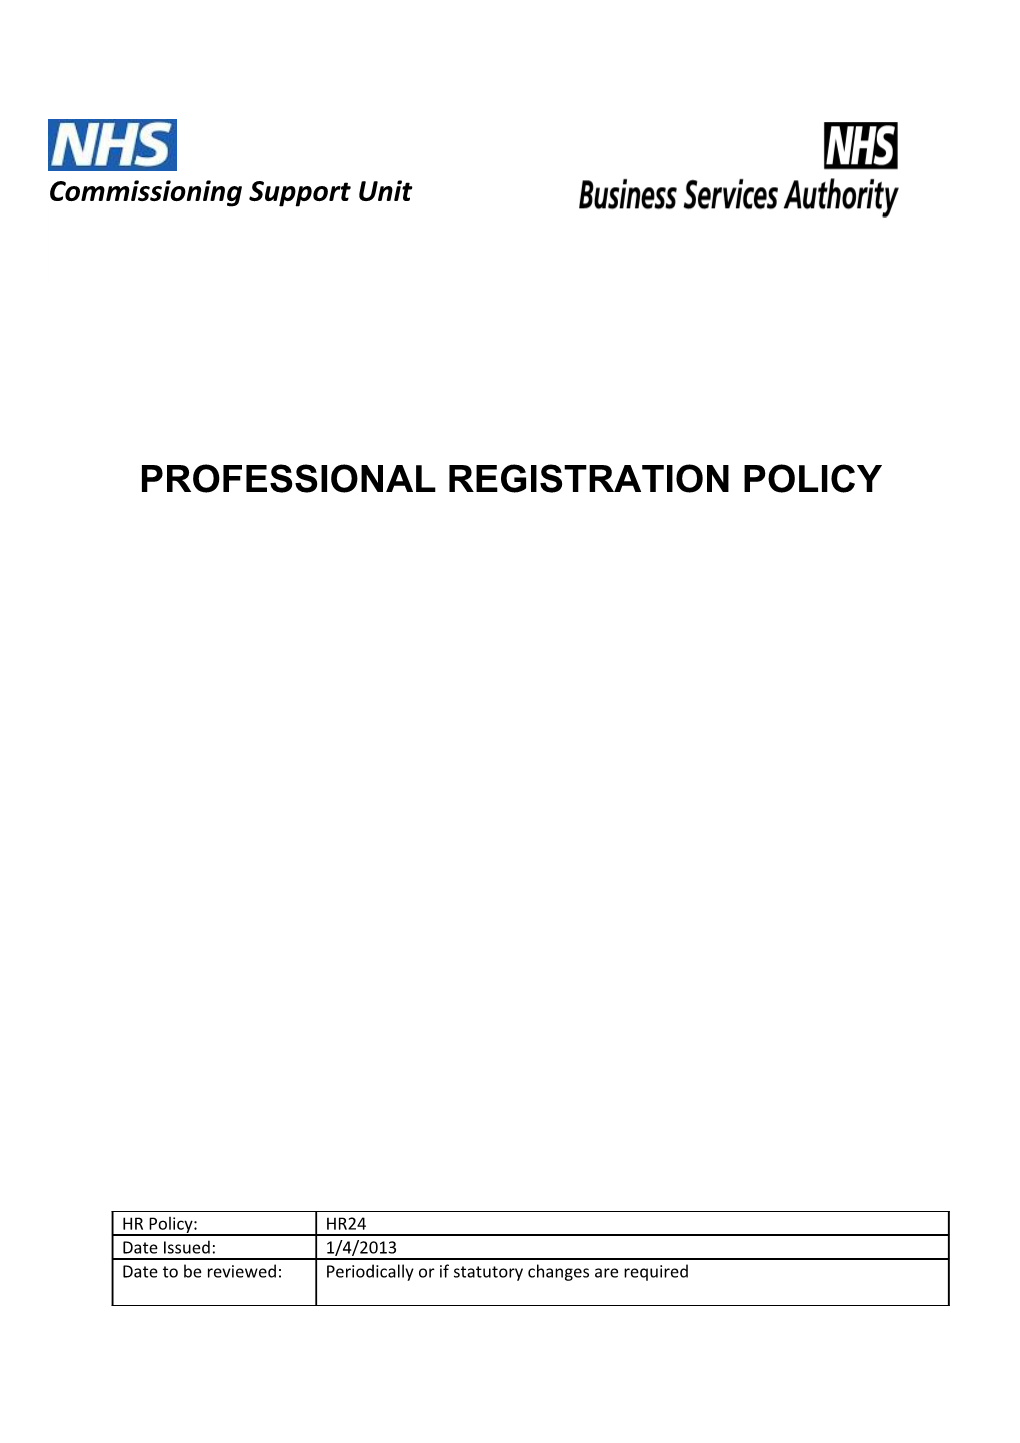 Professional Registration Policy